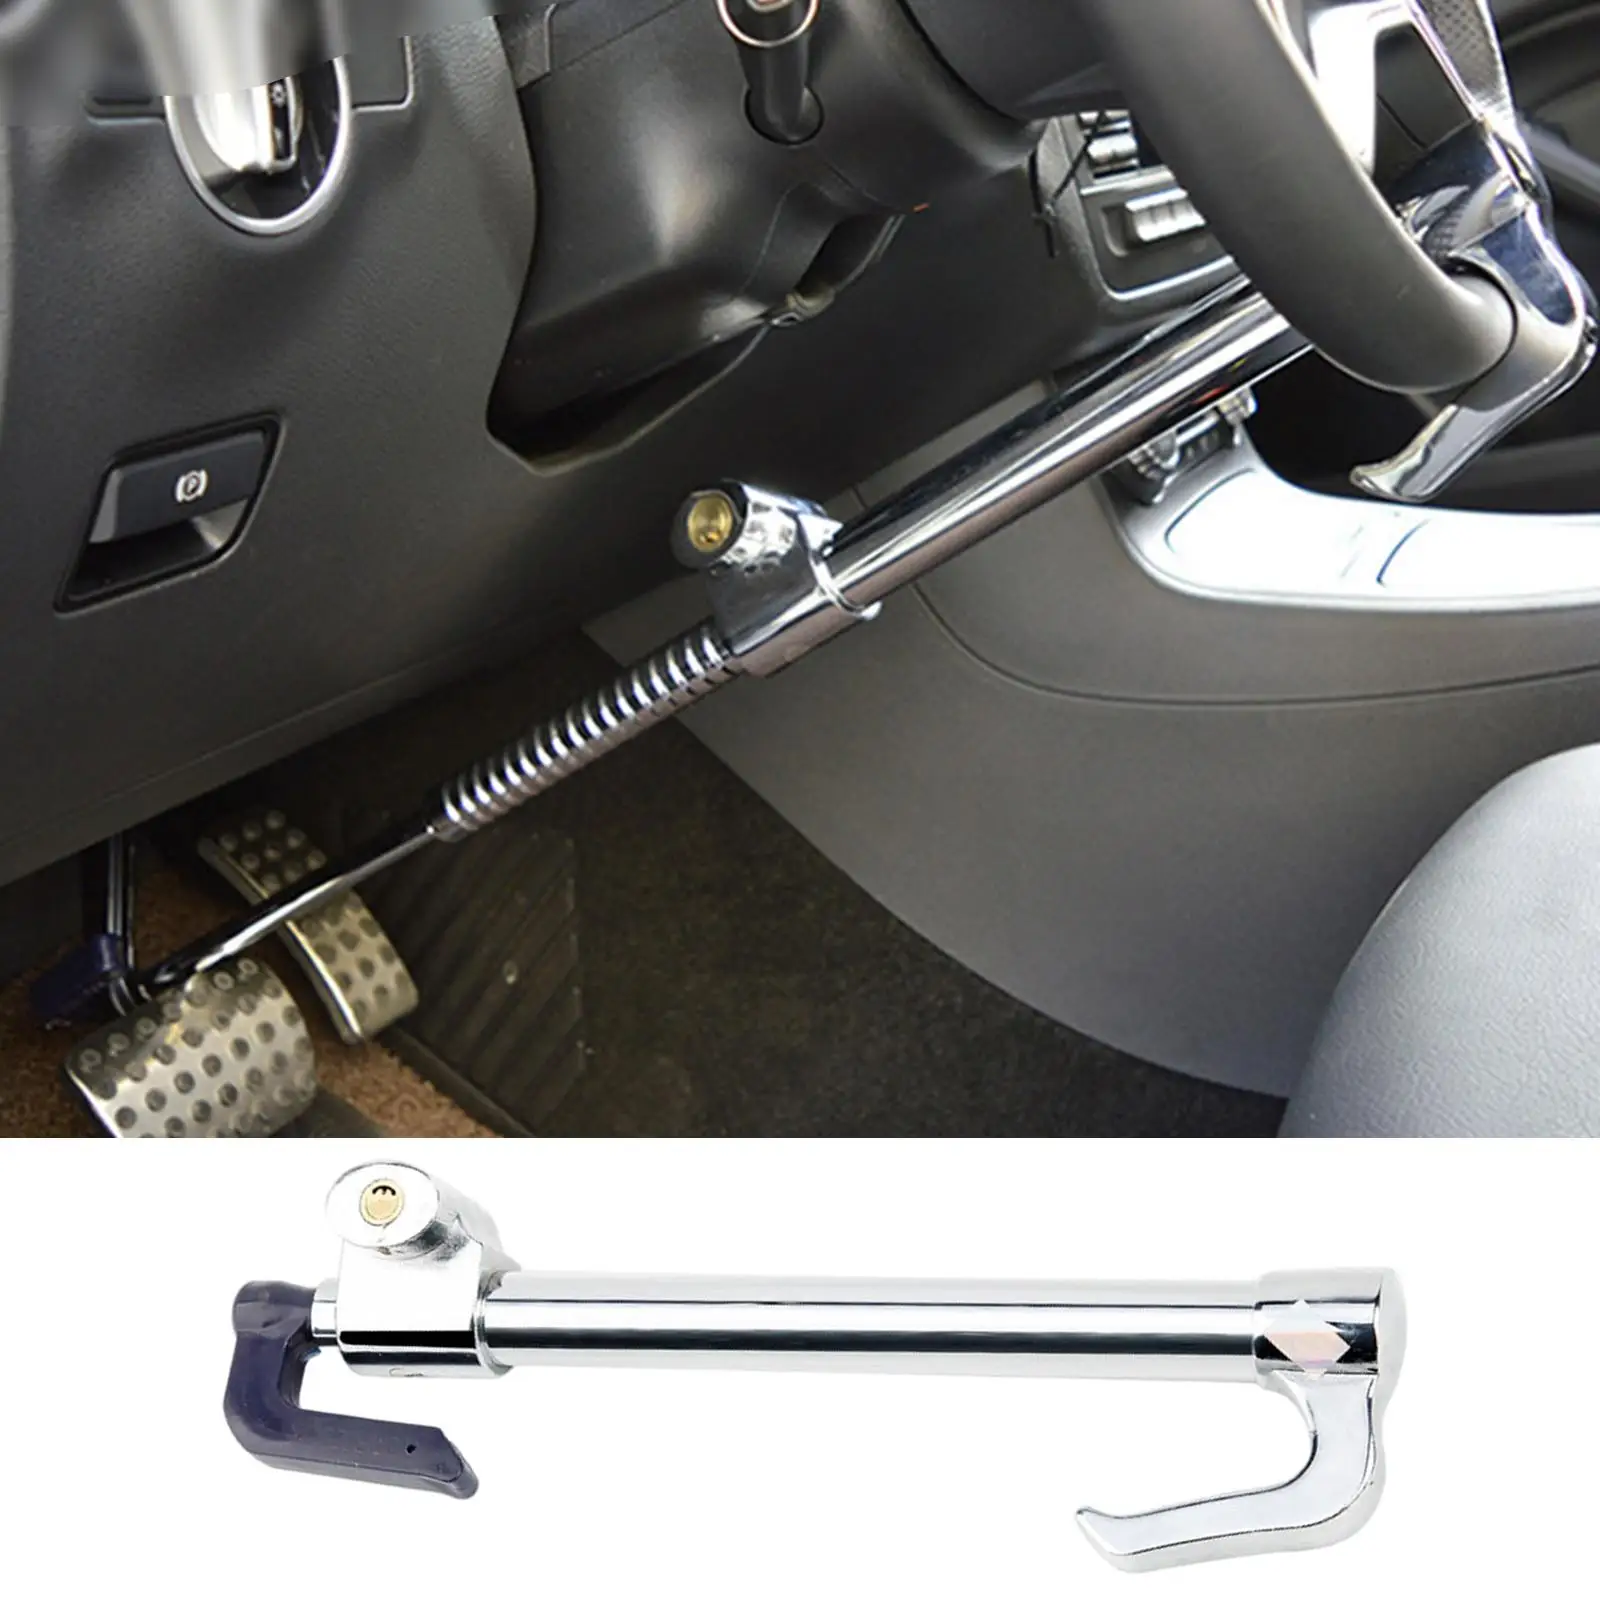 Steering Wheel Lock Extendable Retractable Fit for Vehicles Truck 